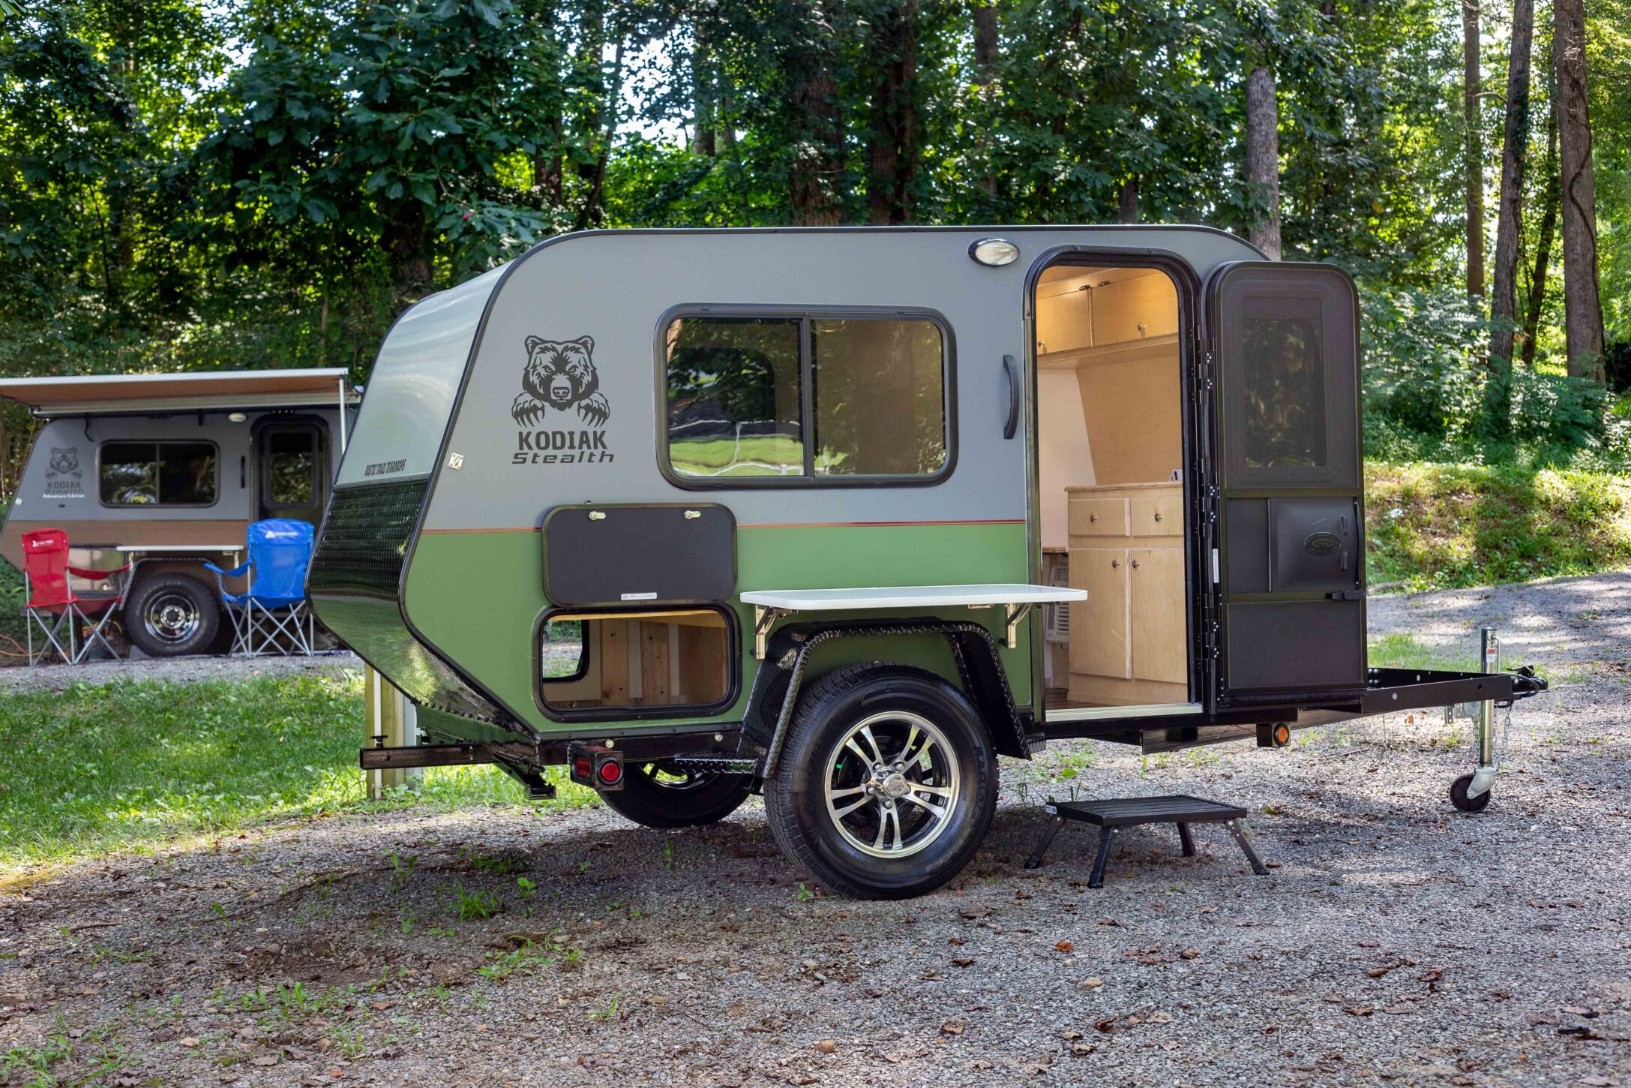 Kodiak Stealth Teardrop Camper Offers the Most Bang for the Least Buck - autoevolution